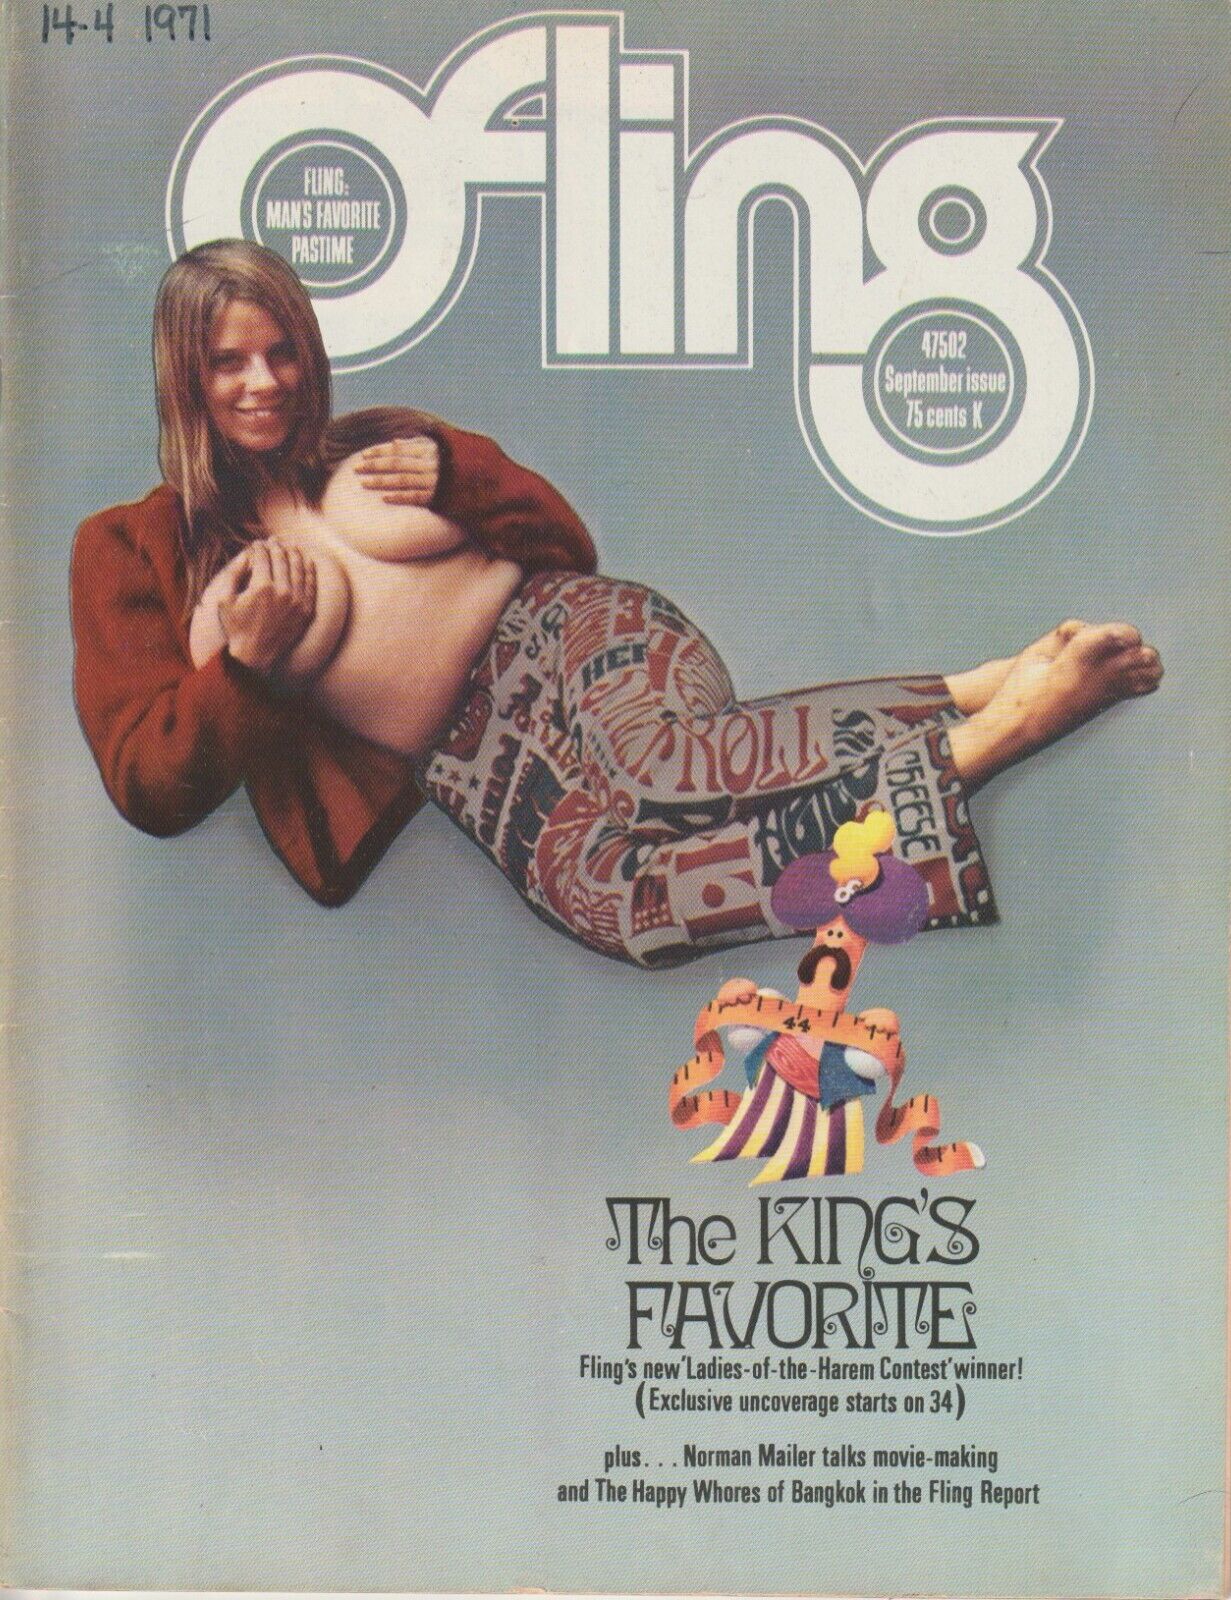 Fling September 1971 -- First Appearance Short Story by Charles Bukowski: No Quickies, Remember (1971)